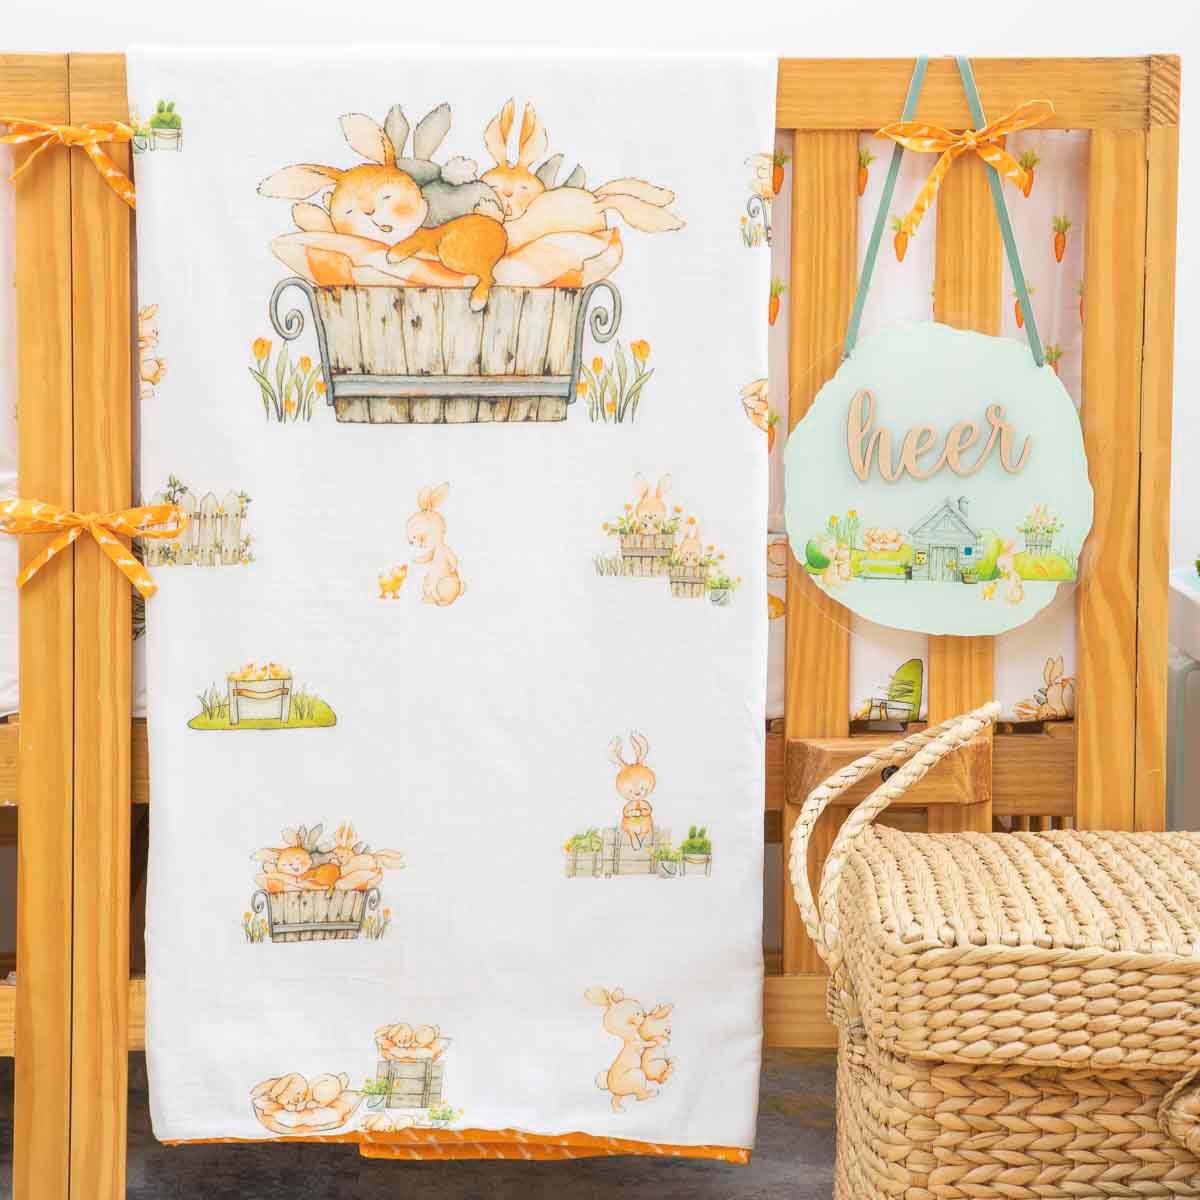 Mr. Marshmallow the Bunny - Cot Bedding Set with Bumper